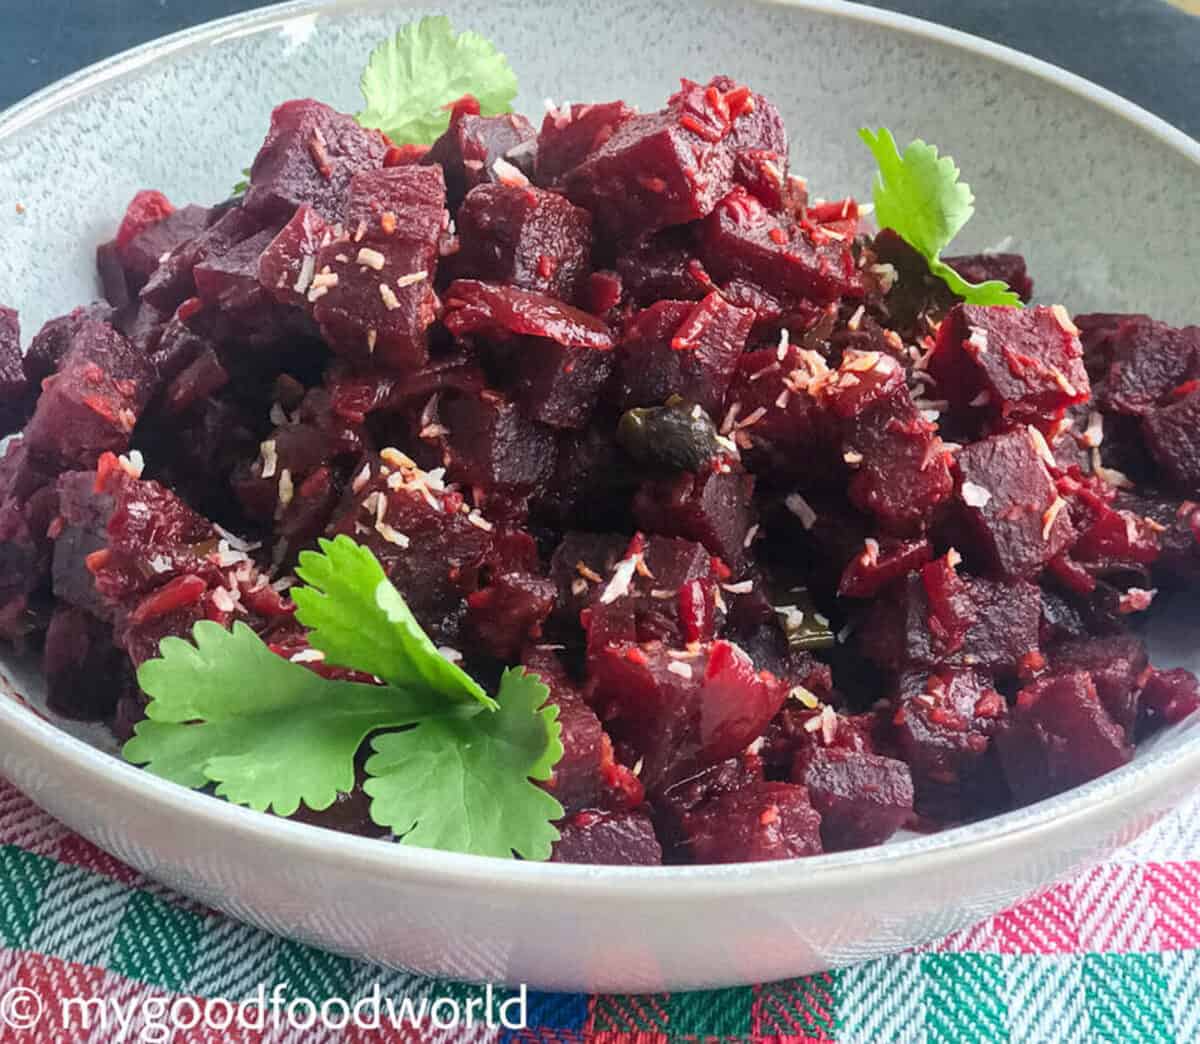 Soft cooked beetroot sautéed with spices and a garnishing of coconut flakes is placed in a round bowl which is placed on a colorful cloth.